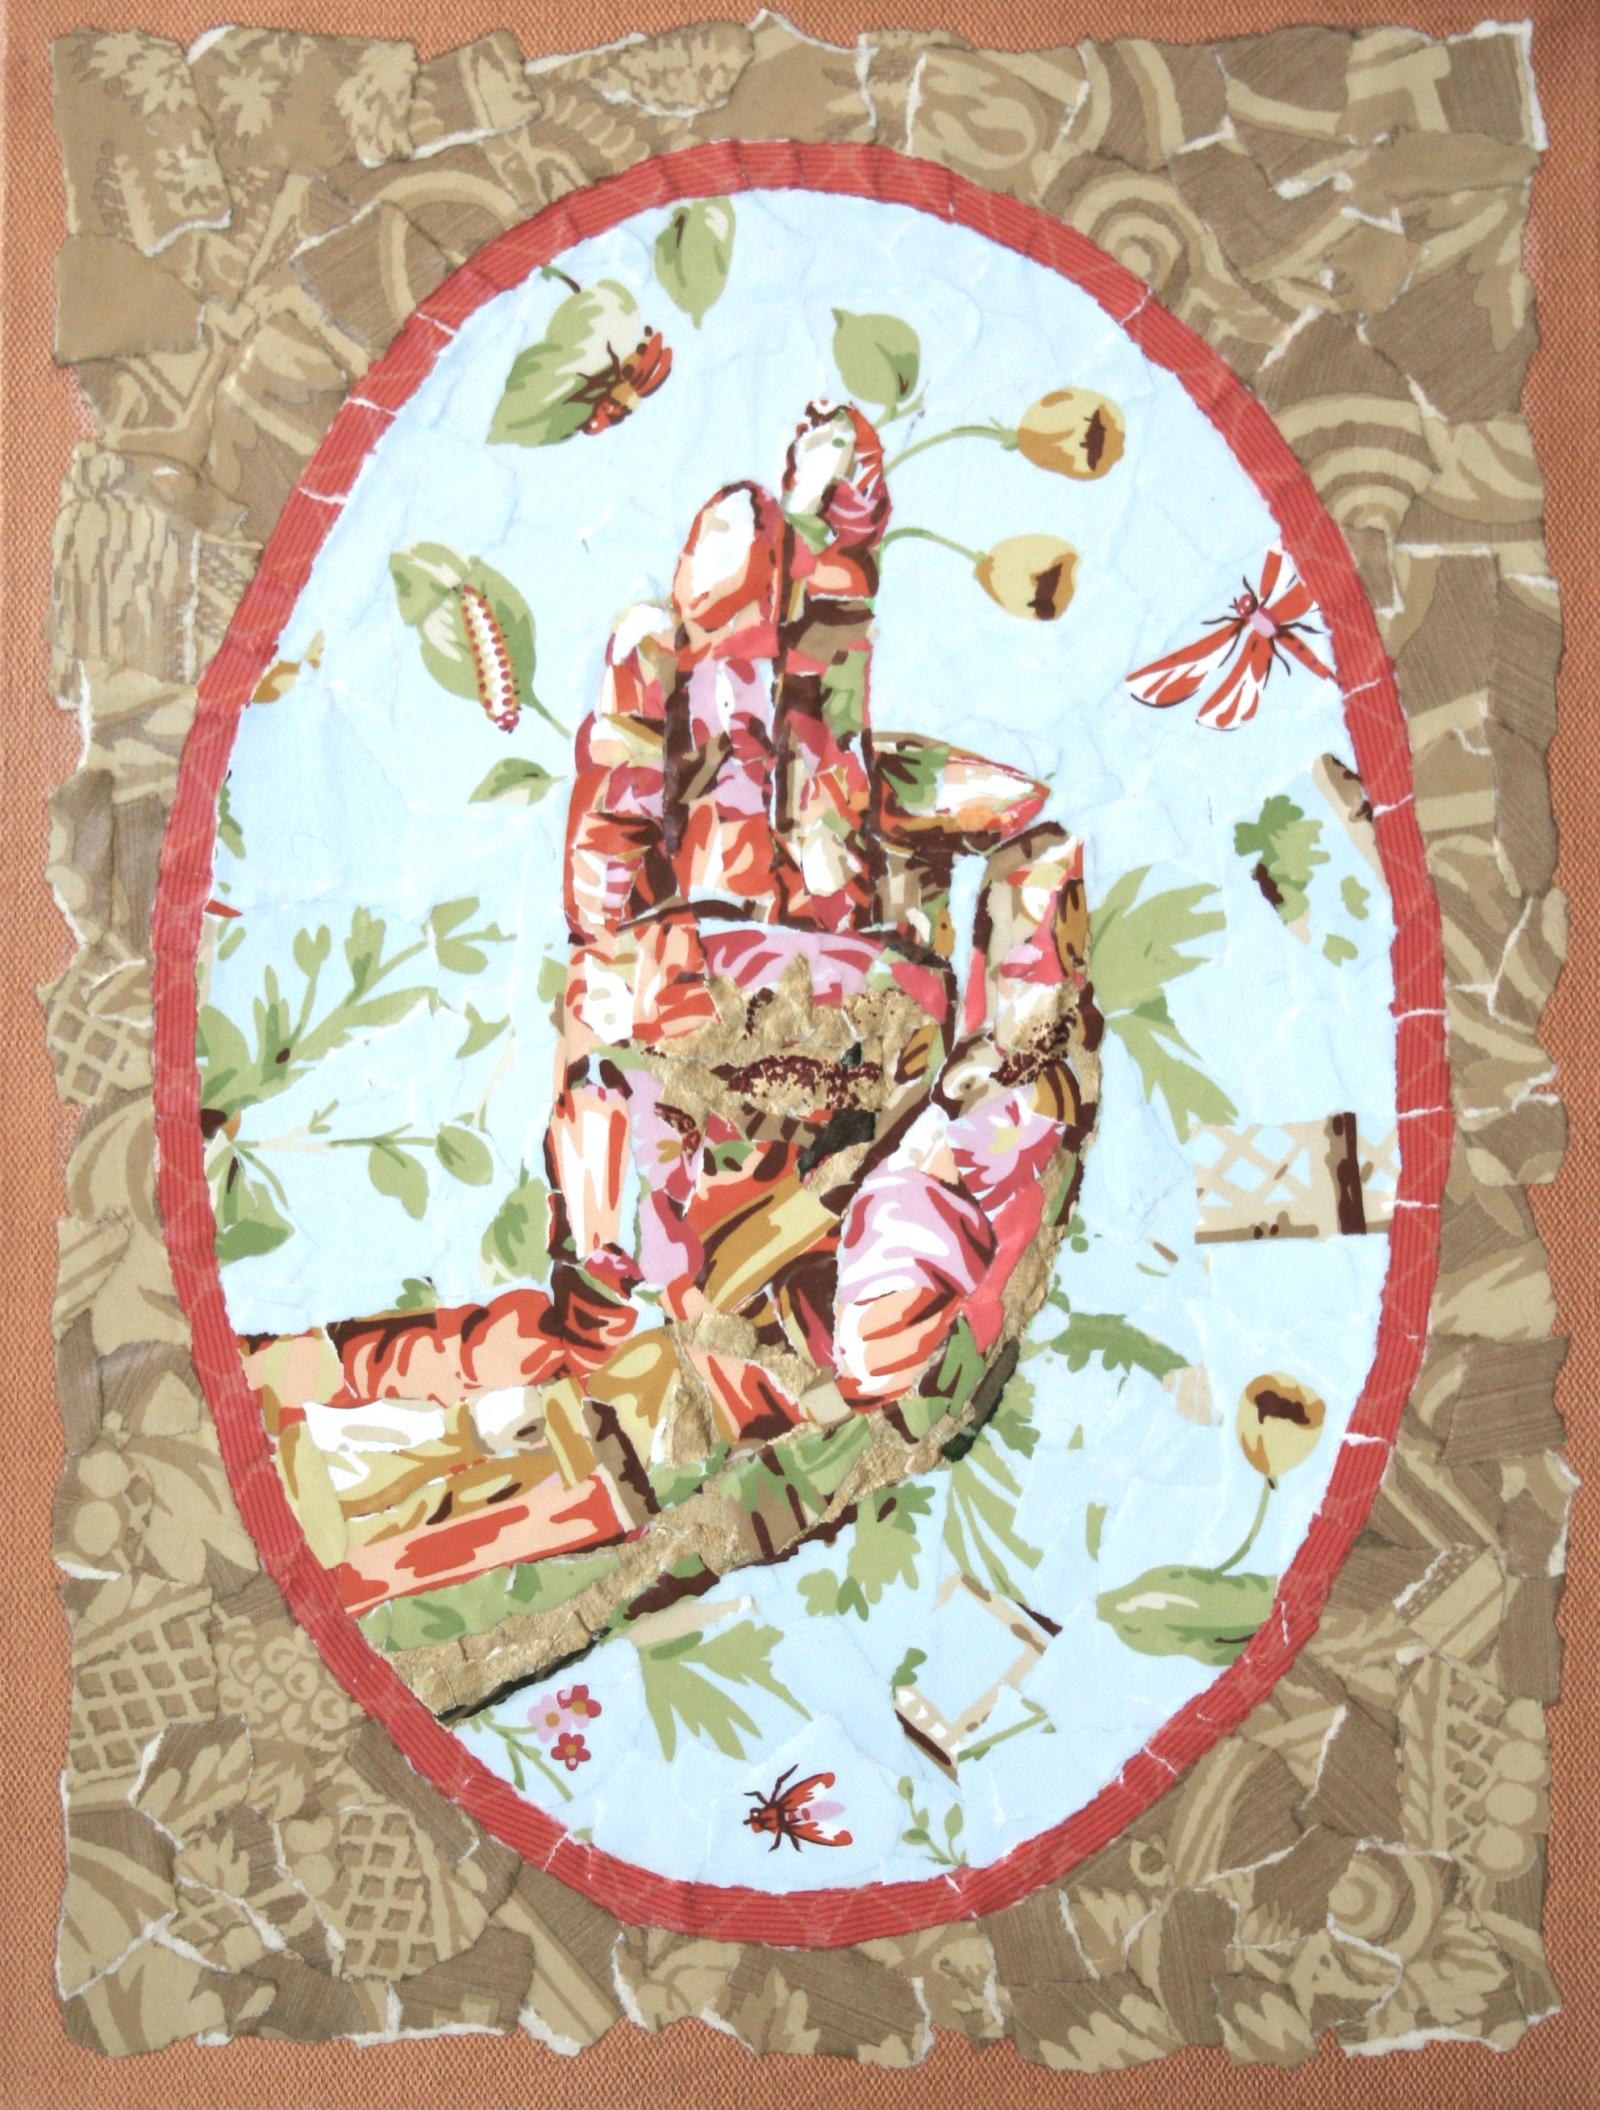 "Vitarka" is a wallpaper collage of a Buddha Mudra (hand gestures) symbolizing teaching and discussions for growth and awakening. This collage was made from pages of a vintage Thibaut wallpaper sample book. The oval adds focus to the hand and references historic portrait compositions.